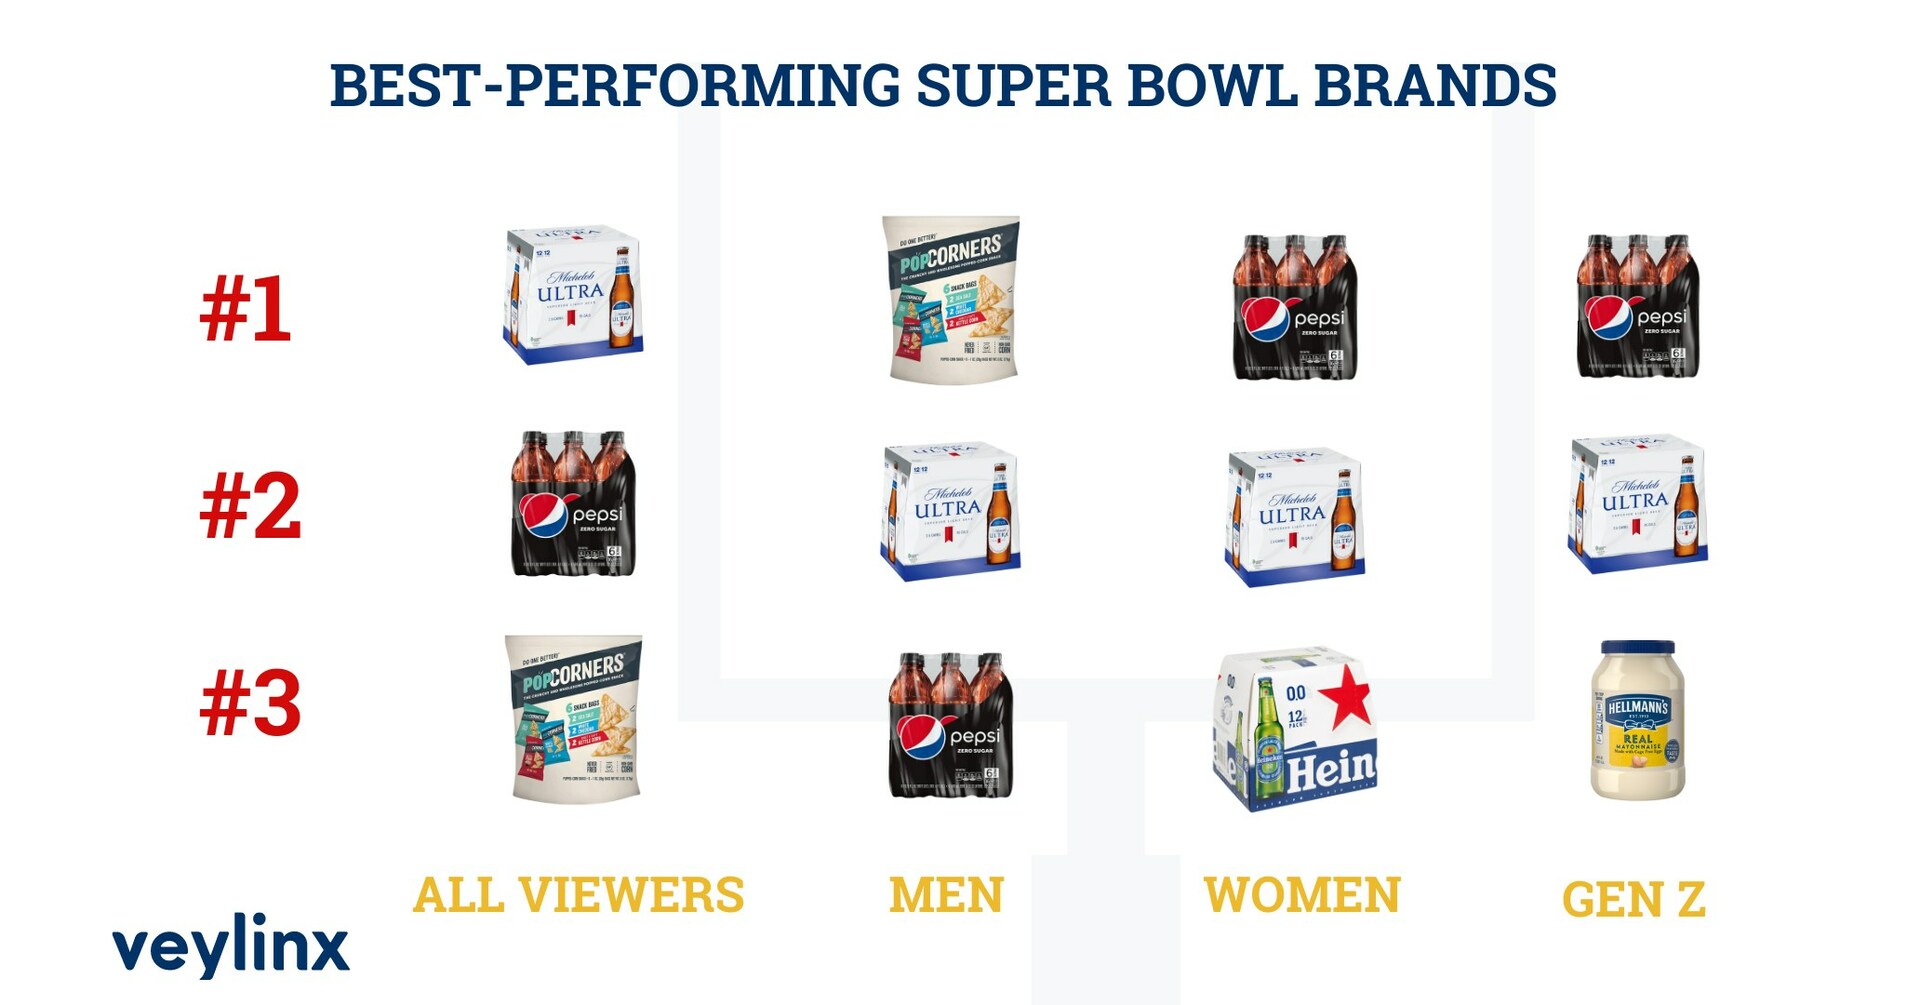 rents masthead ads by the hour to Super Bowl brands